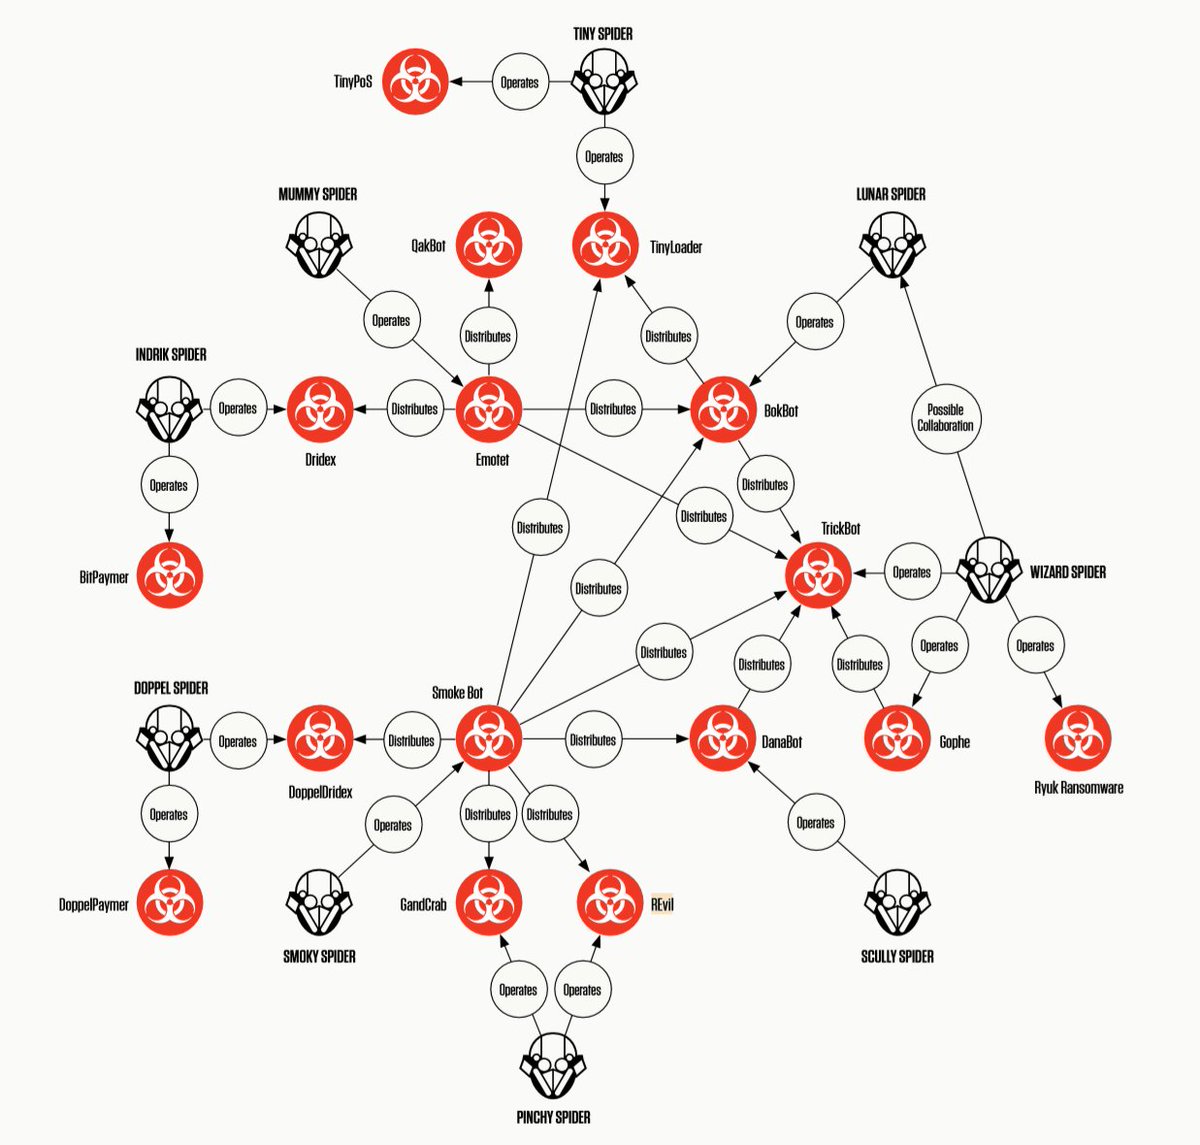 Great work by CrowdStrike, mapping the cybercrime eco-system. All high-end affiliate groups connected in one way or another. Trickbot, Emotet, QakBot, BokBot (IcedID), DanaBot, Ryuk, GandCrab, REvil, DoppelPaymer, Dridex, BitPaymer, and more: